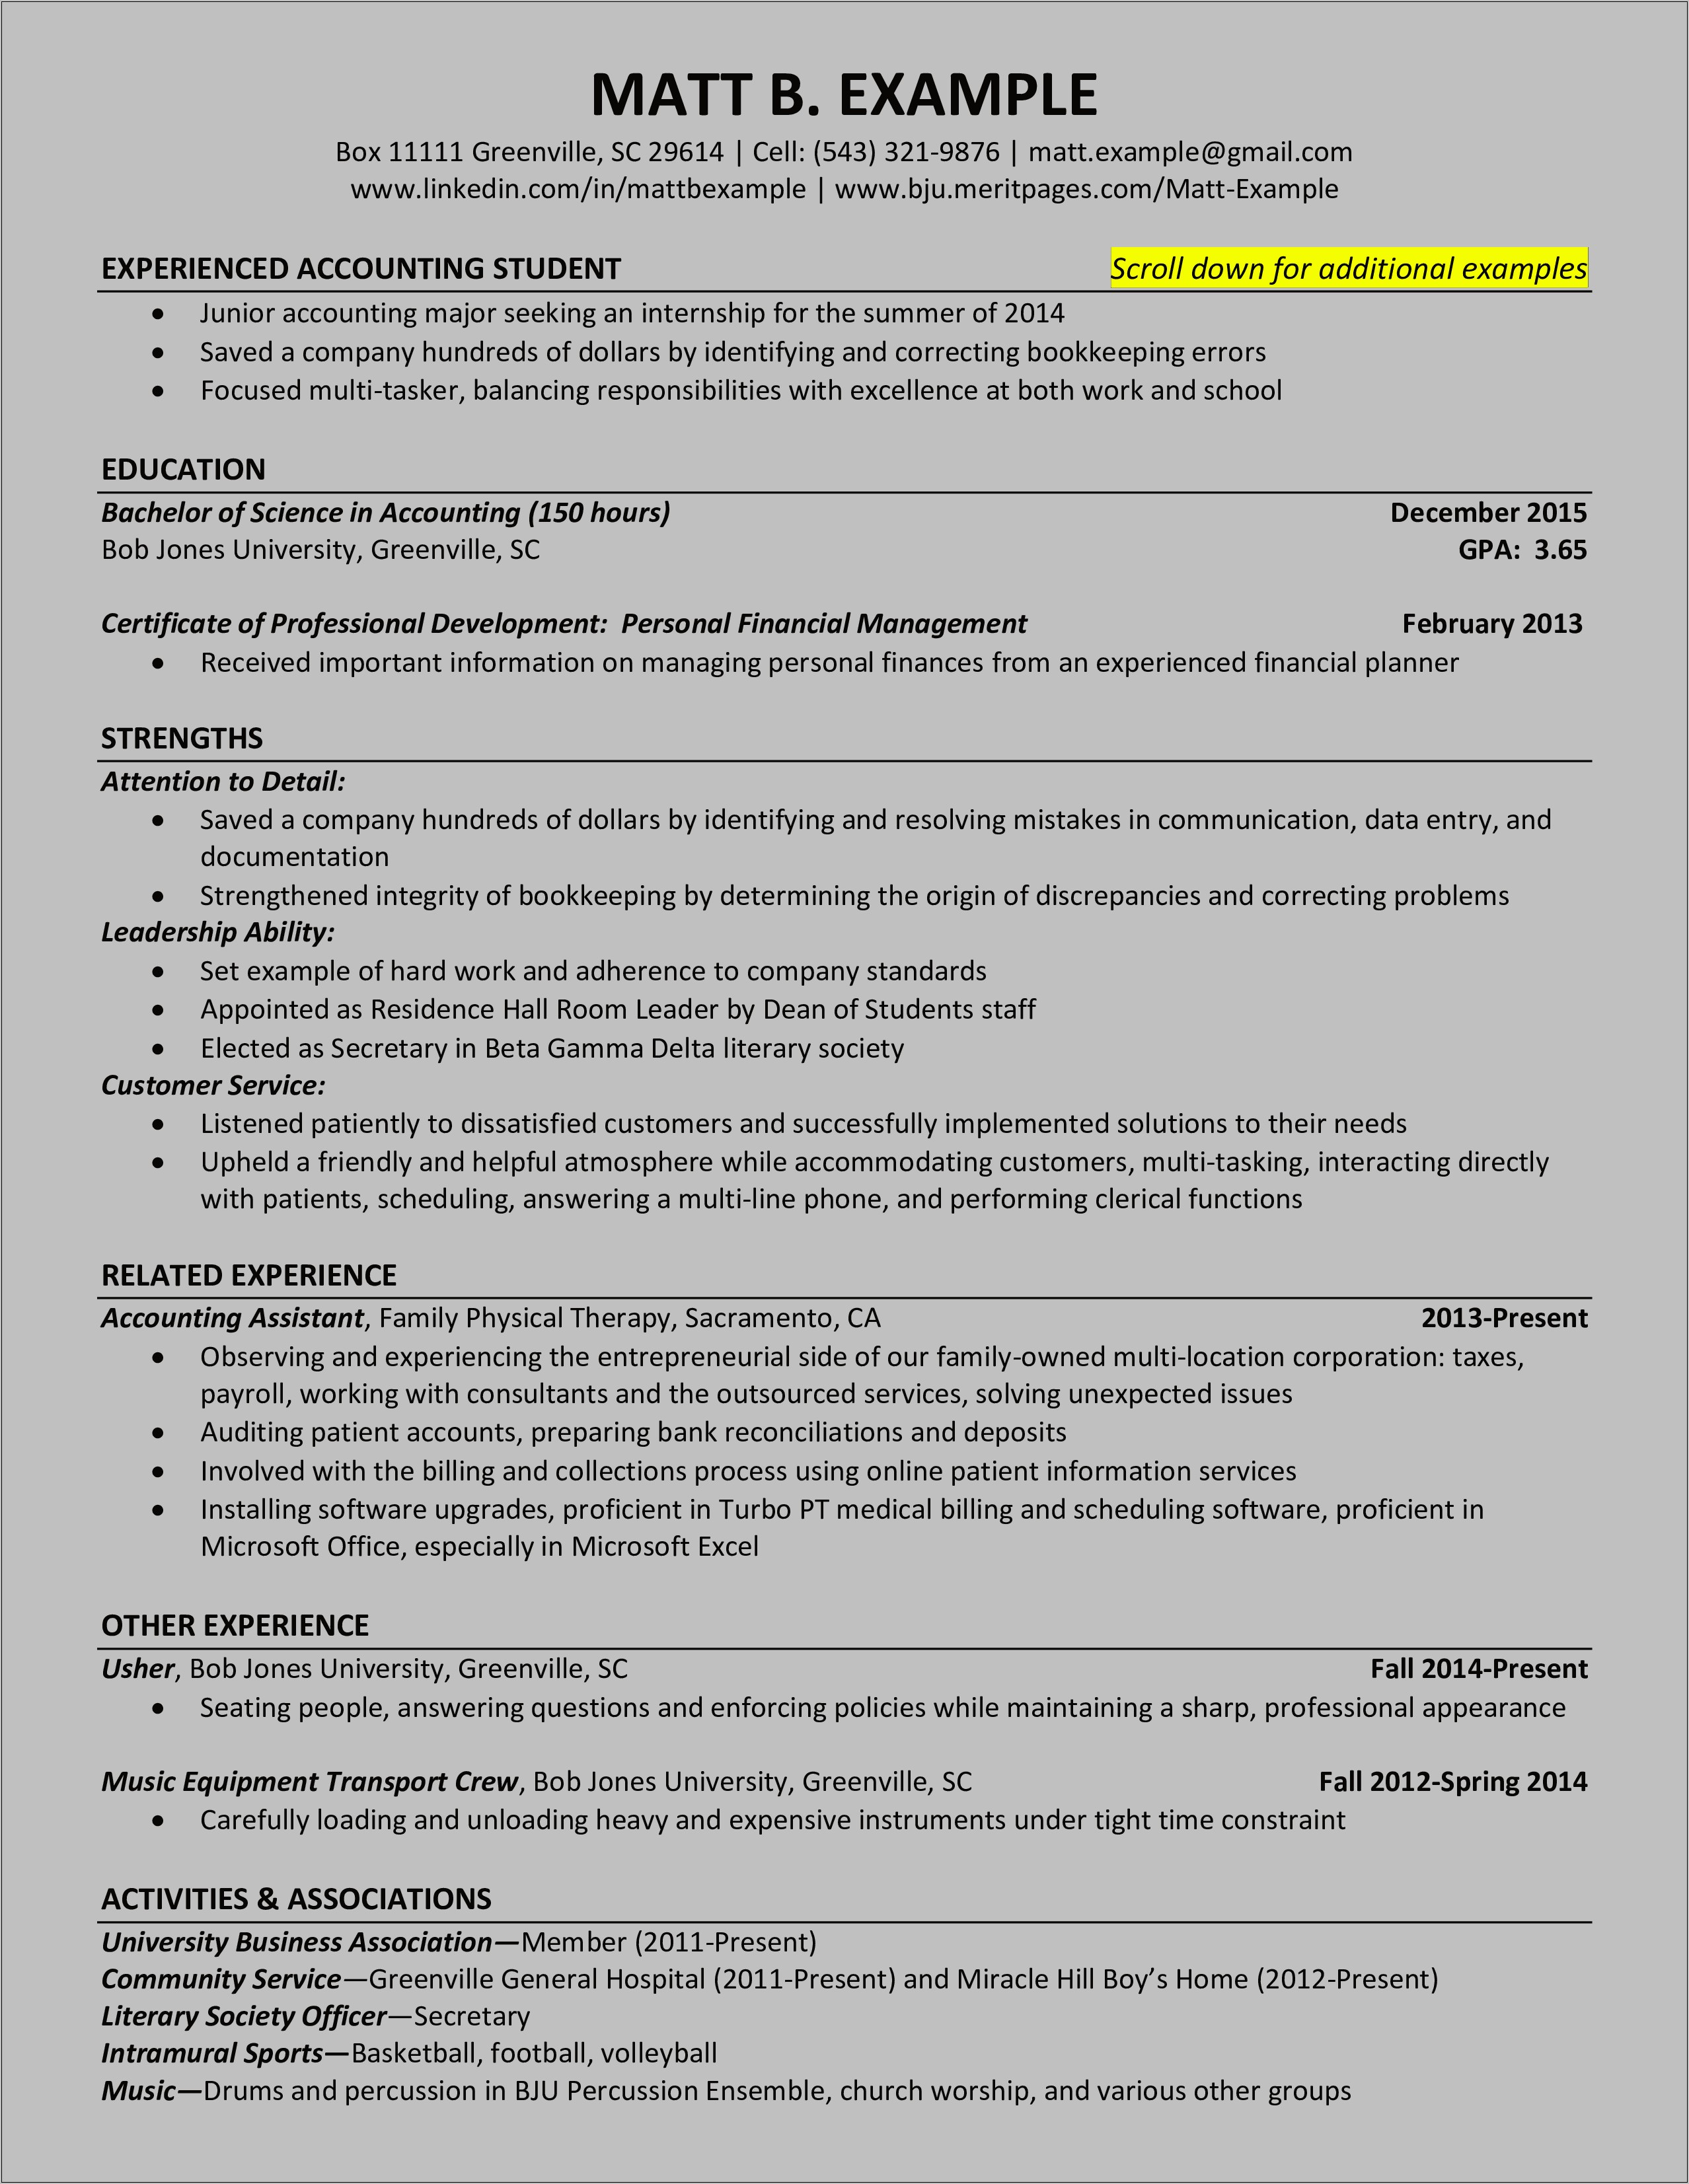 Resume In Word Format For An Accountant